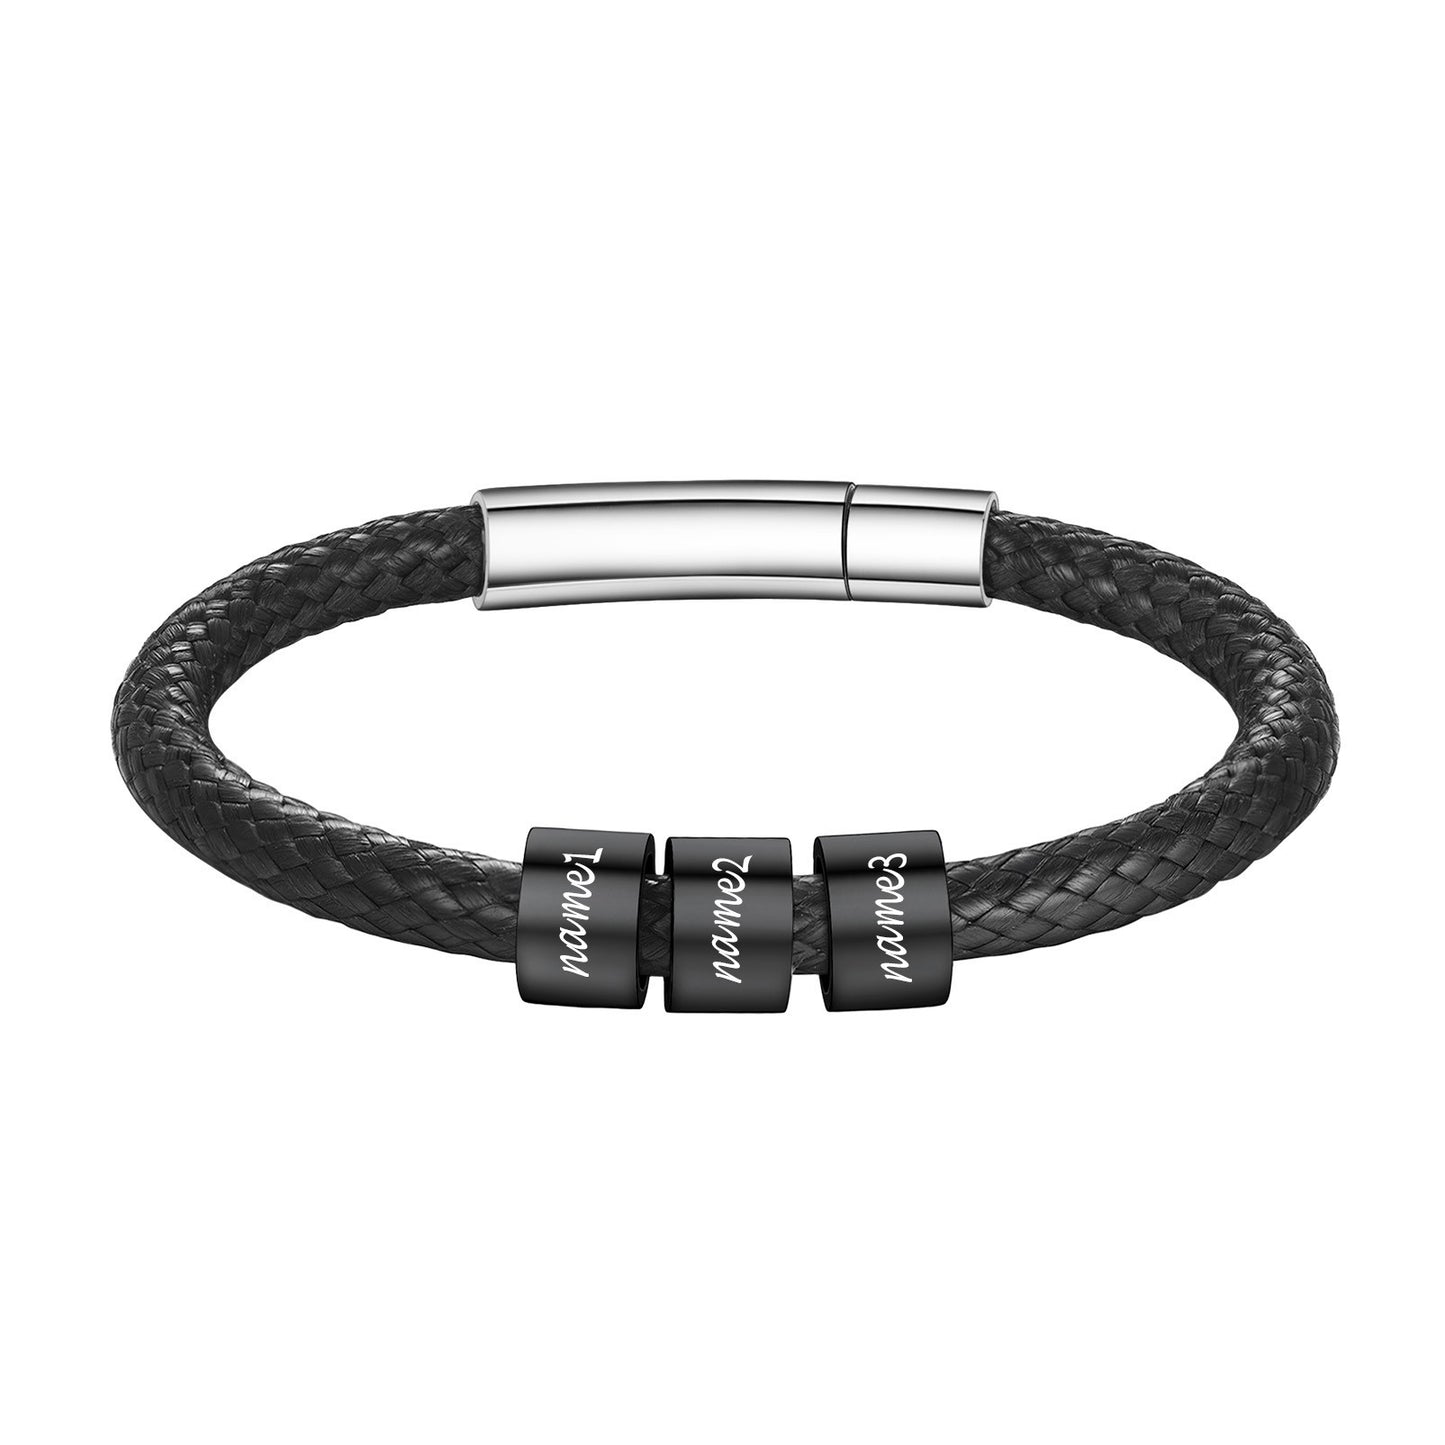 Customized Leather Braided Rope Bracelet with 3 Engraving Beads Black